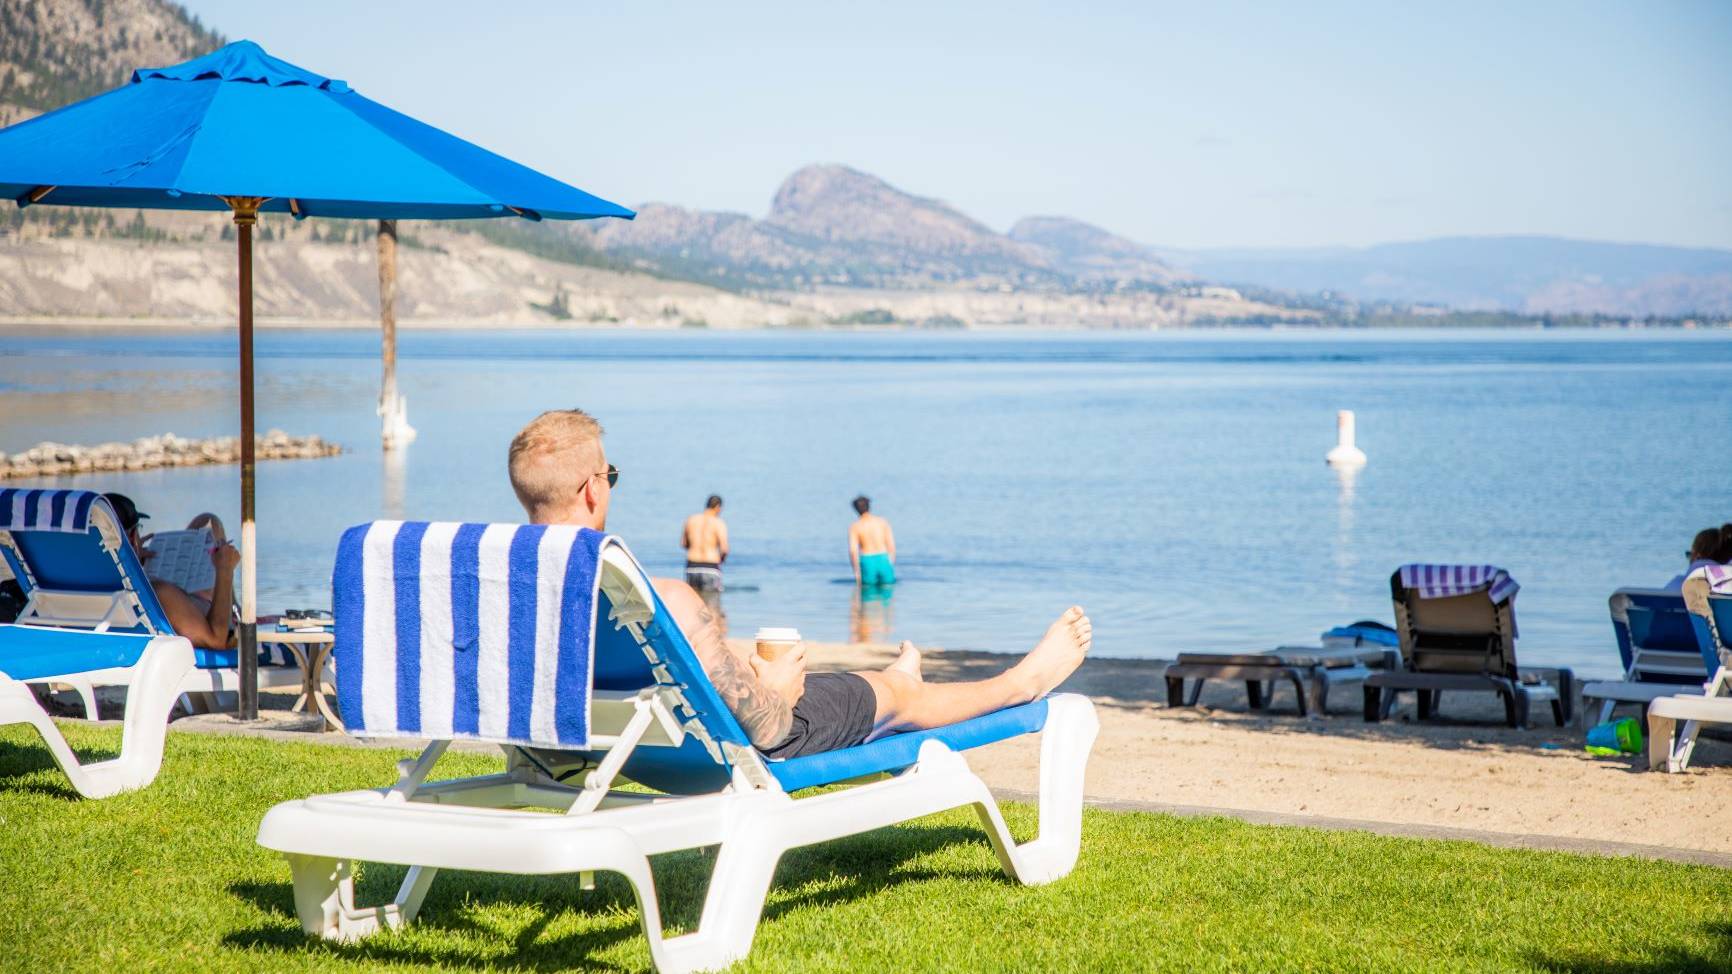 When you’re visiting Penticton Lakeside Resort & Conference Centre, rest assured that your safety and security is our highest priority.